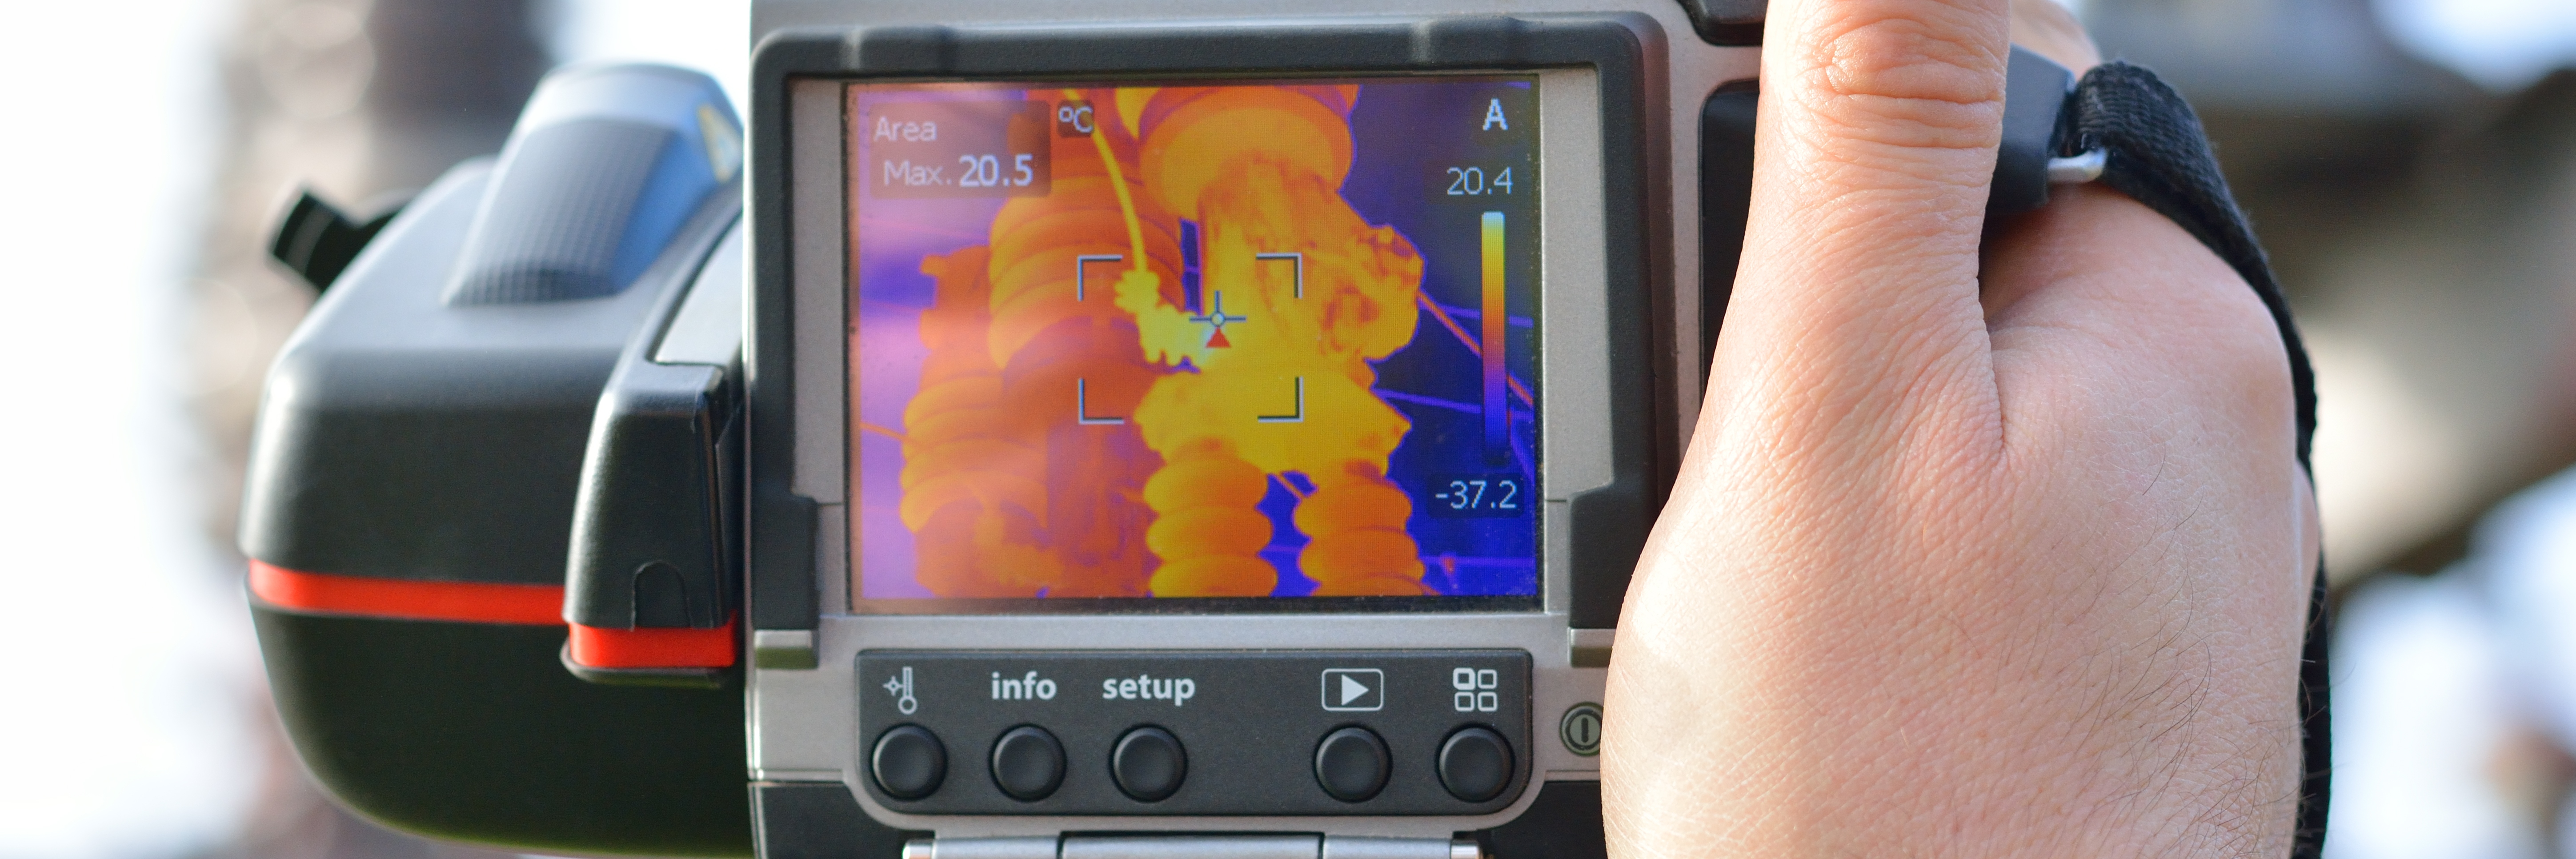 https://www.munichre.com/content/dam/munichre/hsb/hsb-iic/images/services-engineering-infrared-thermography-overview-hsb-508160564.jpg/_jcr_content/renditions/cropped.3_to_1.jpg./cropped.3_to_1.jpg